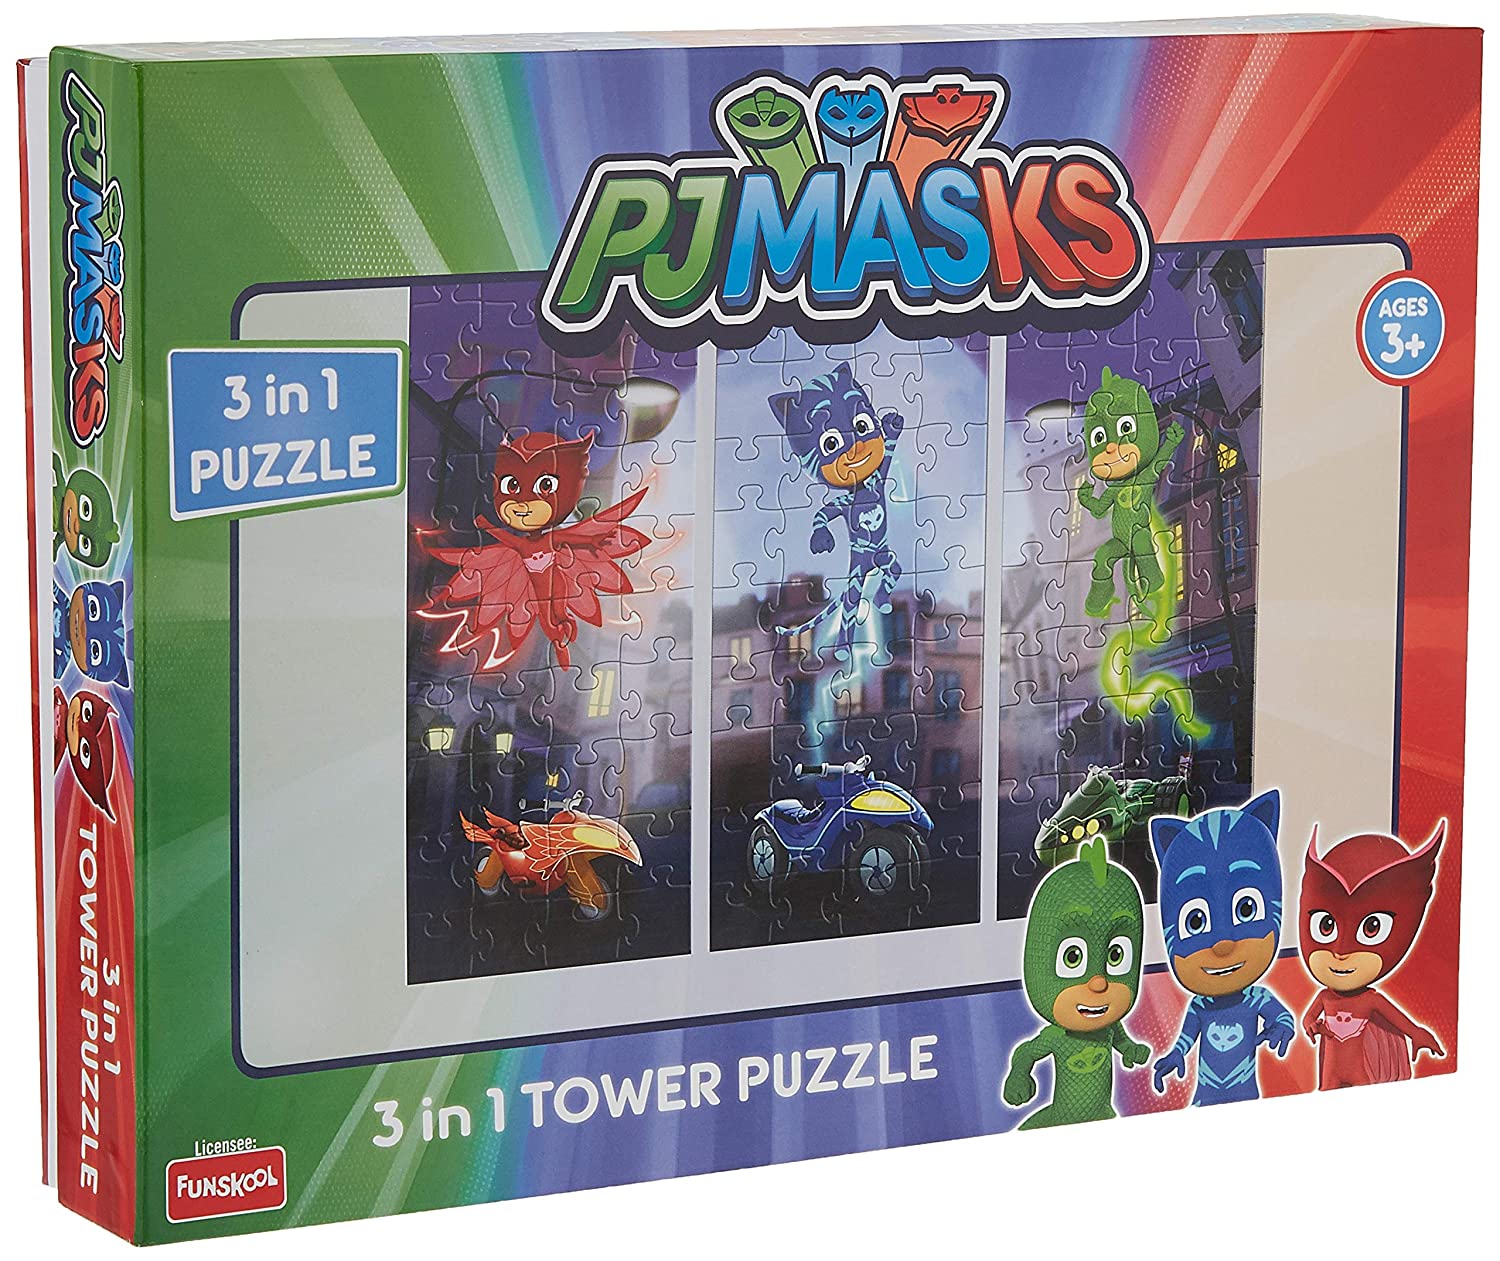 PJ MASK TOWER PUZZLE